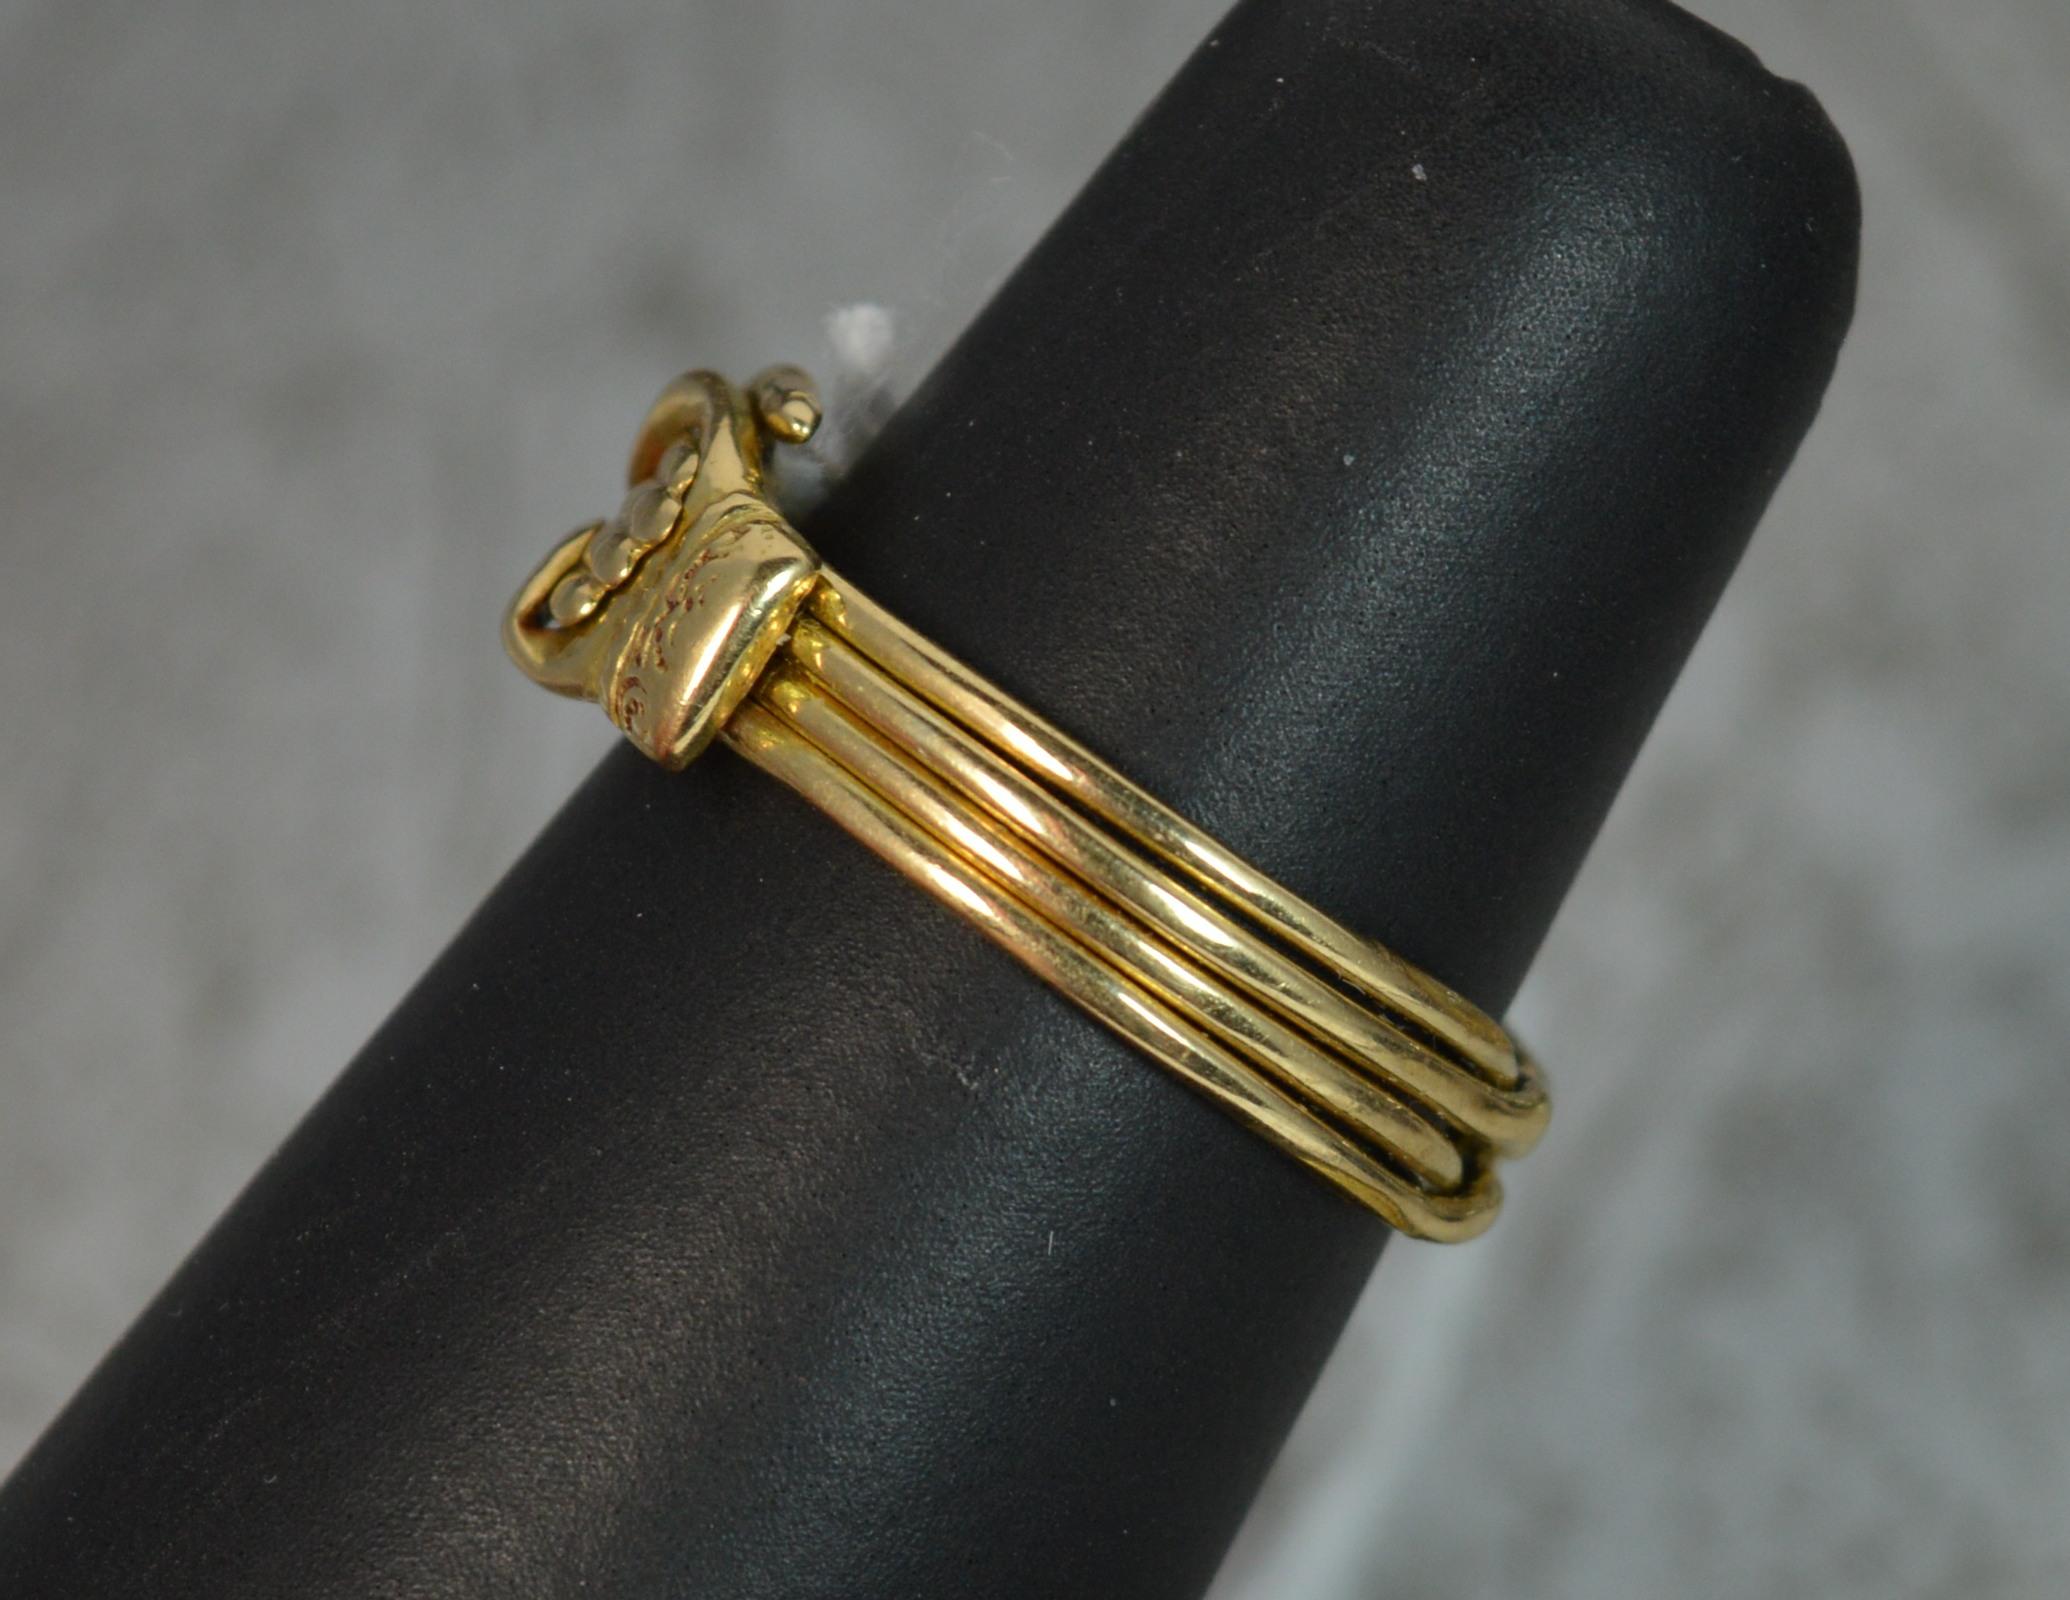 A superb true mid Georgian era Fede band ring, c1760.
SIZE ; N UK, 6 3/4 US
18 carat yellow gold example.
Designed as four bands creating a puzzle ring design with a fede two hands holding to front.
A fede ring is a design of ring in which two hands